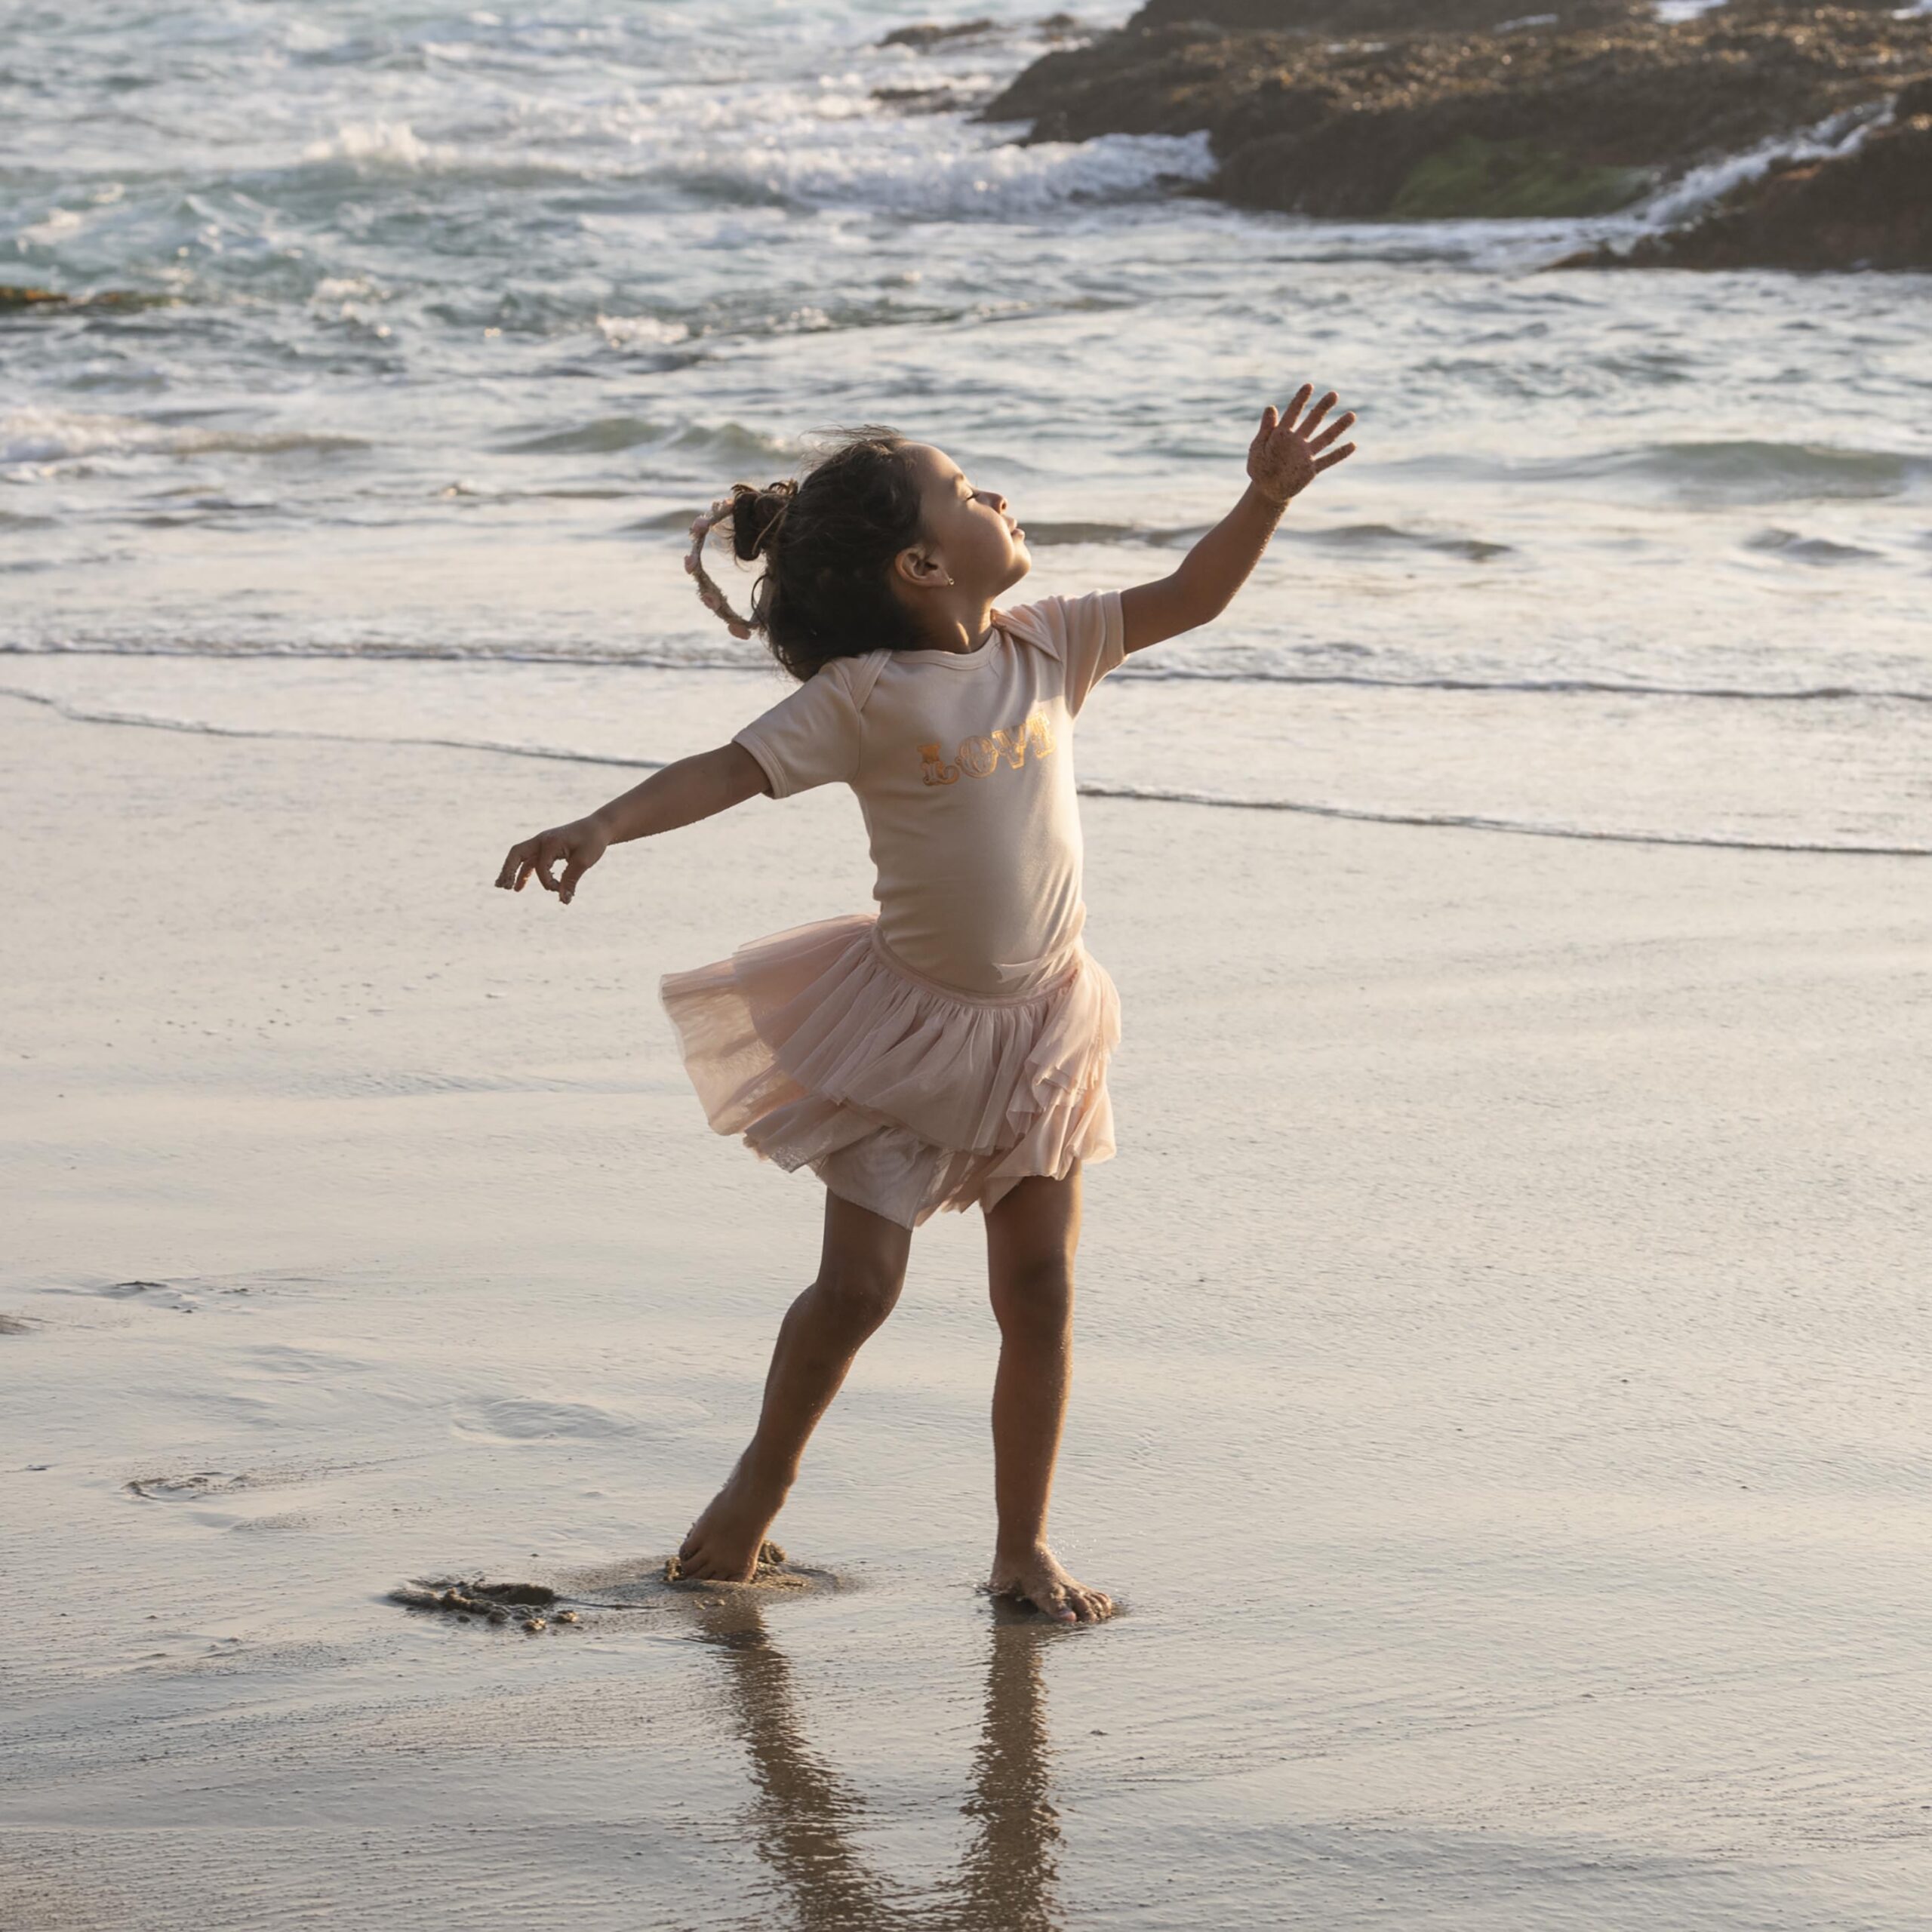 Young girl wearing a pink dress running on the sand in Laguna Beach.